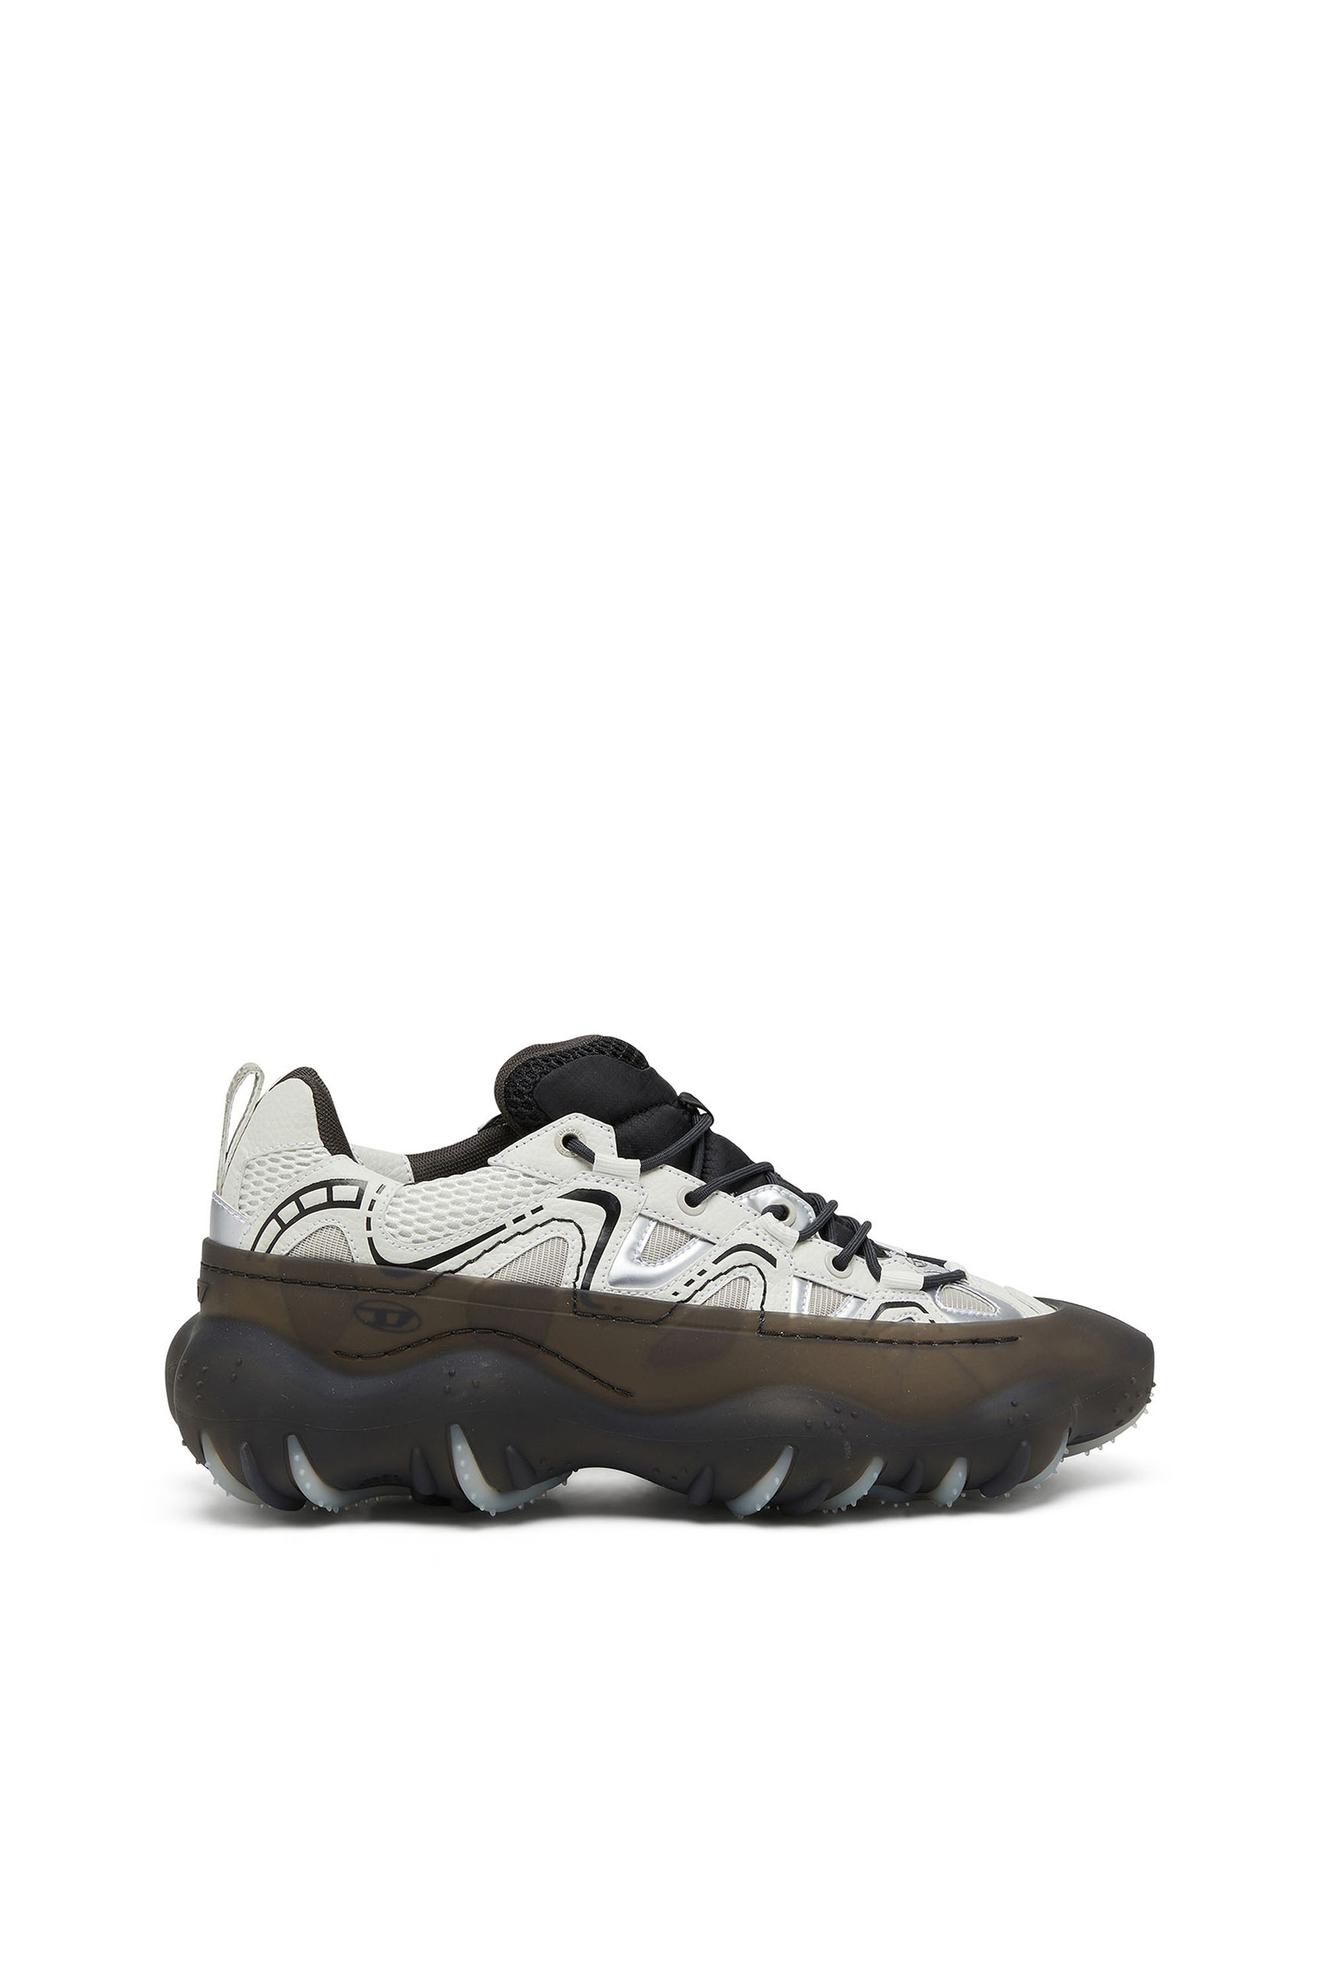 S-Prototype P1 Sneakers - Sneakers with transparent rubber overlay offers at £360 in Diesel